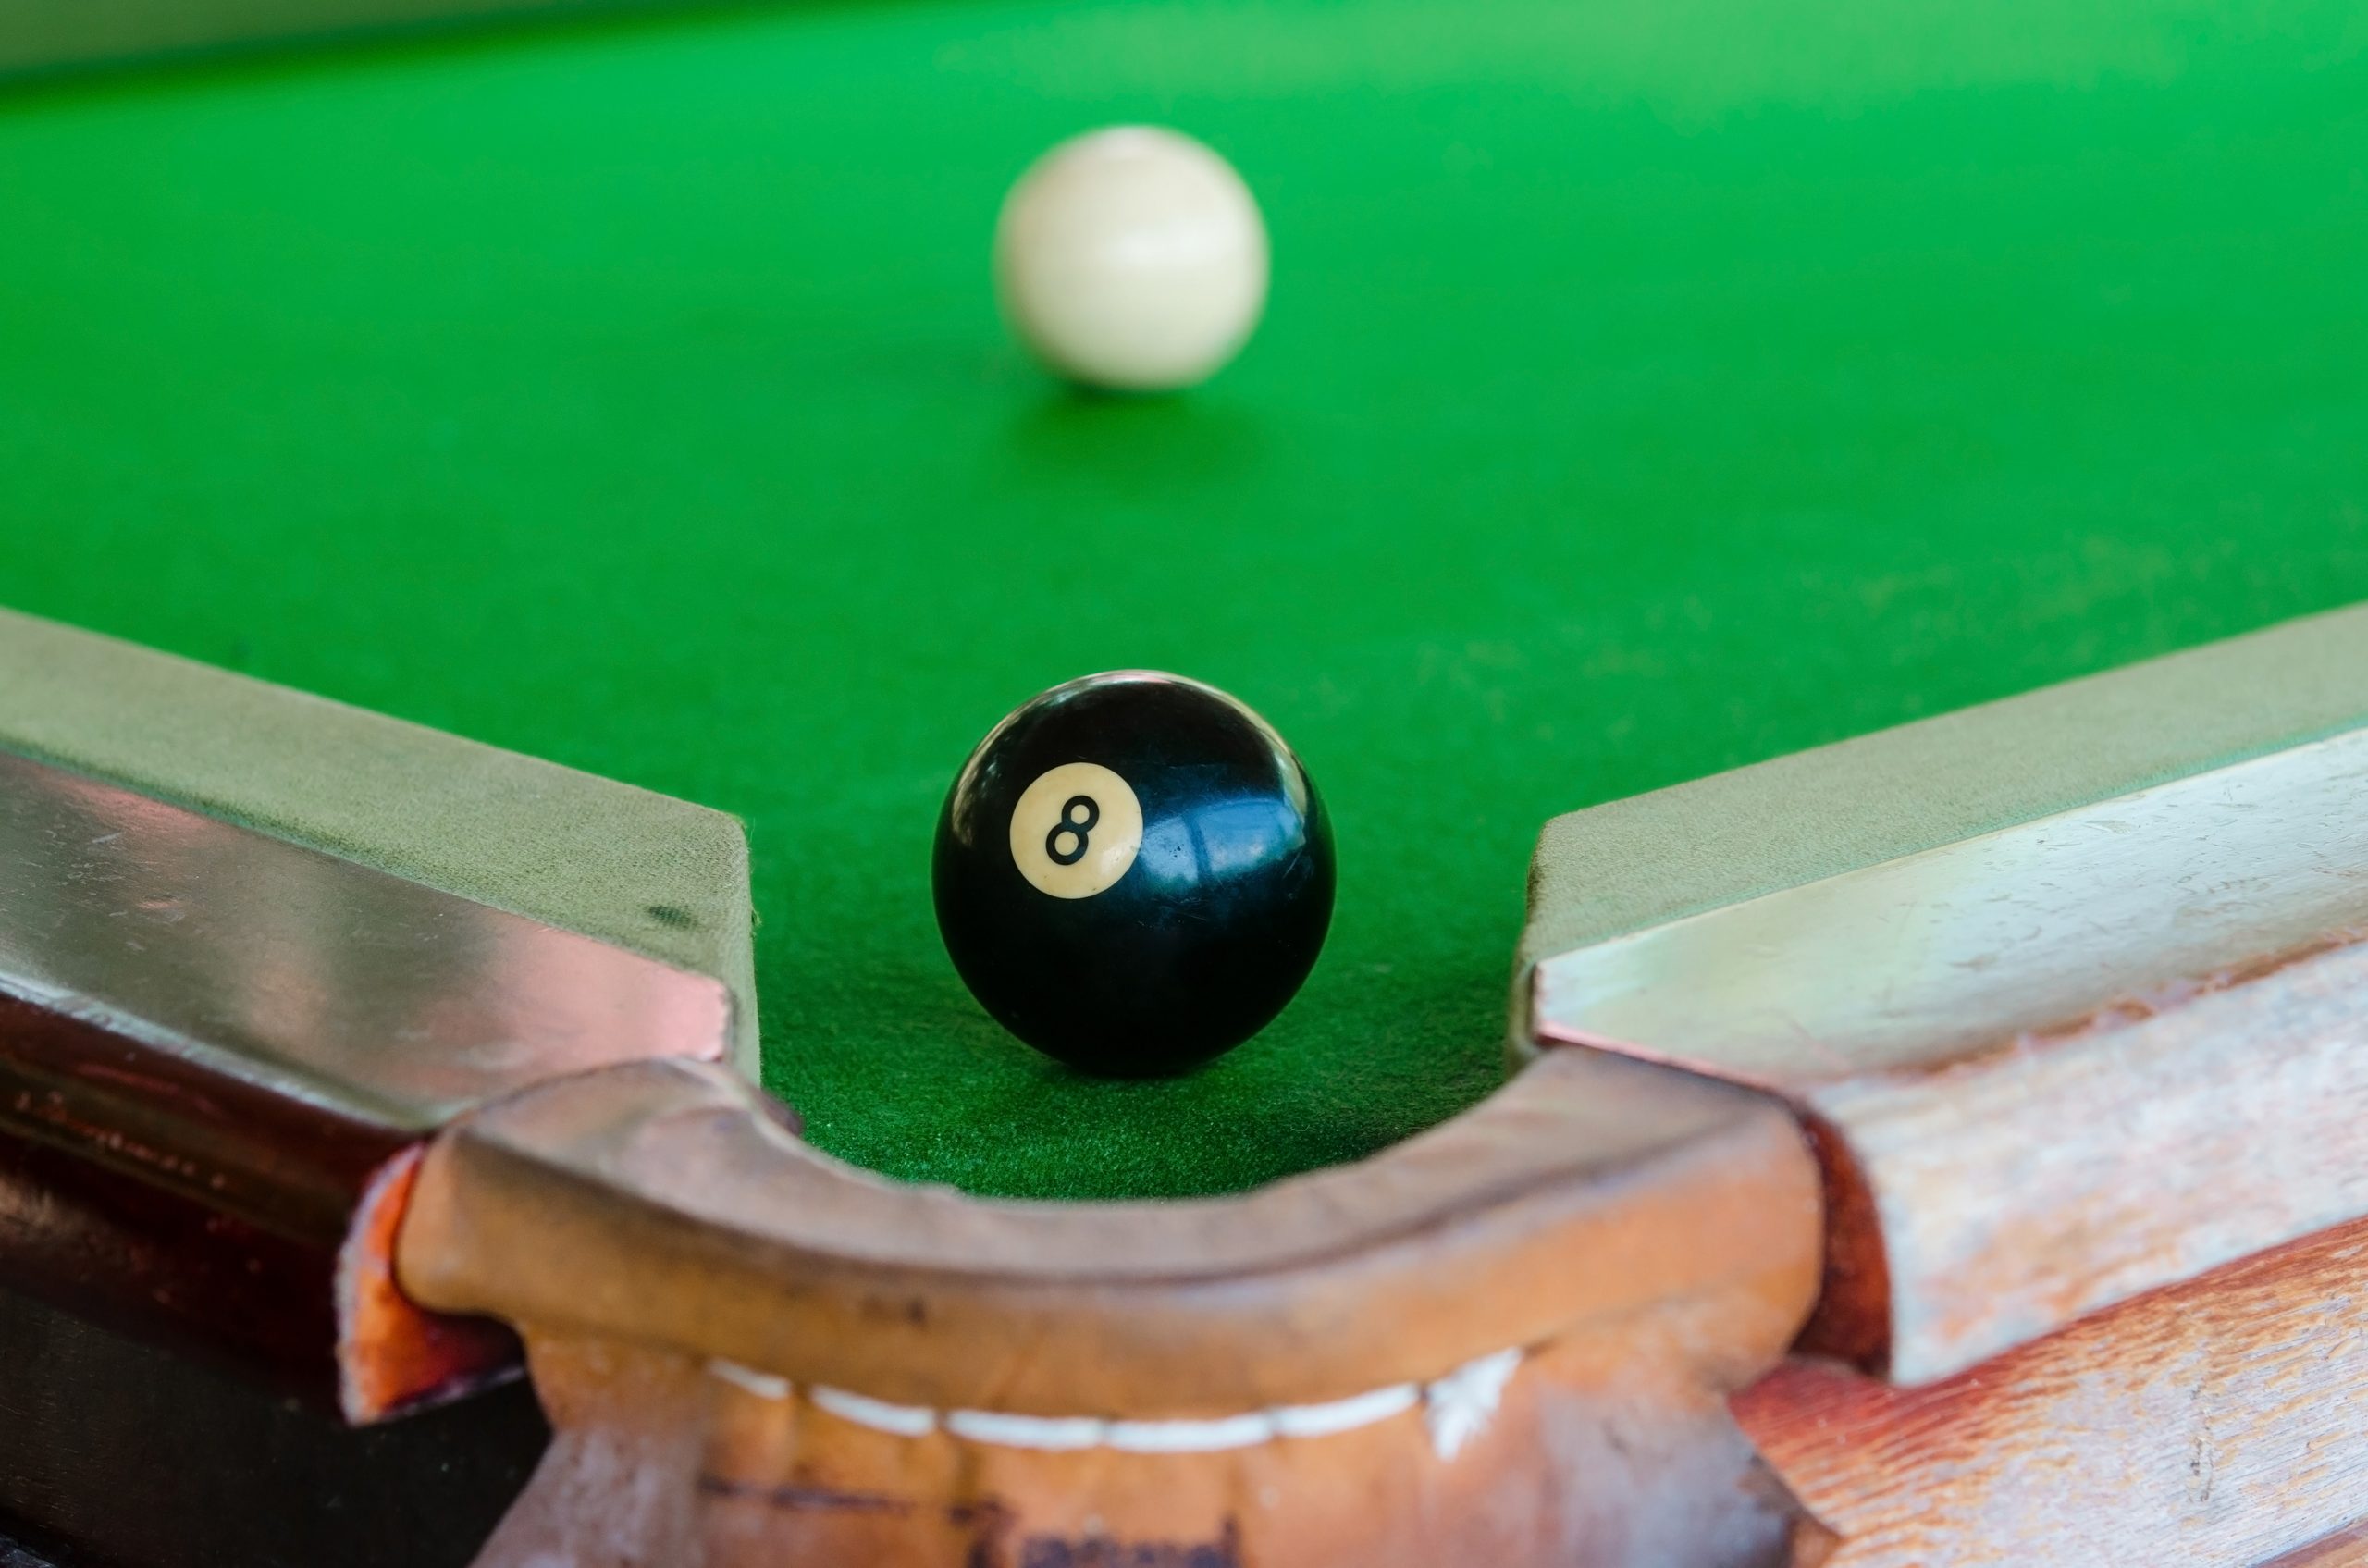 play store gamesfree pool games